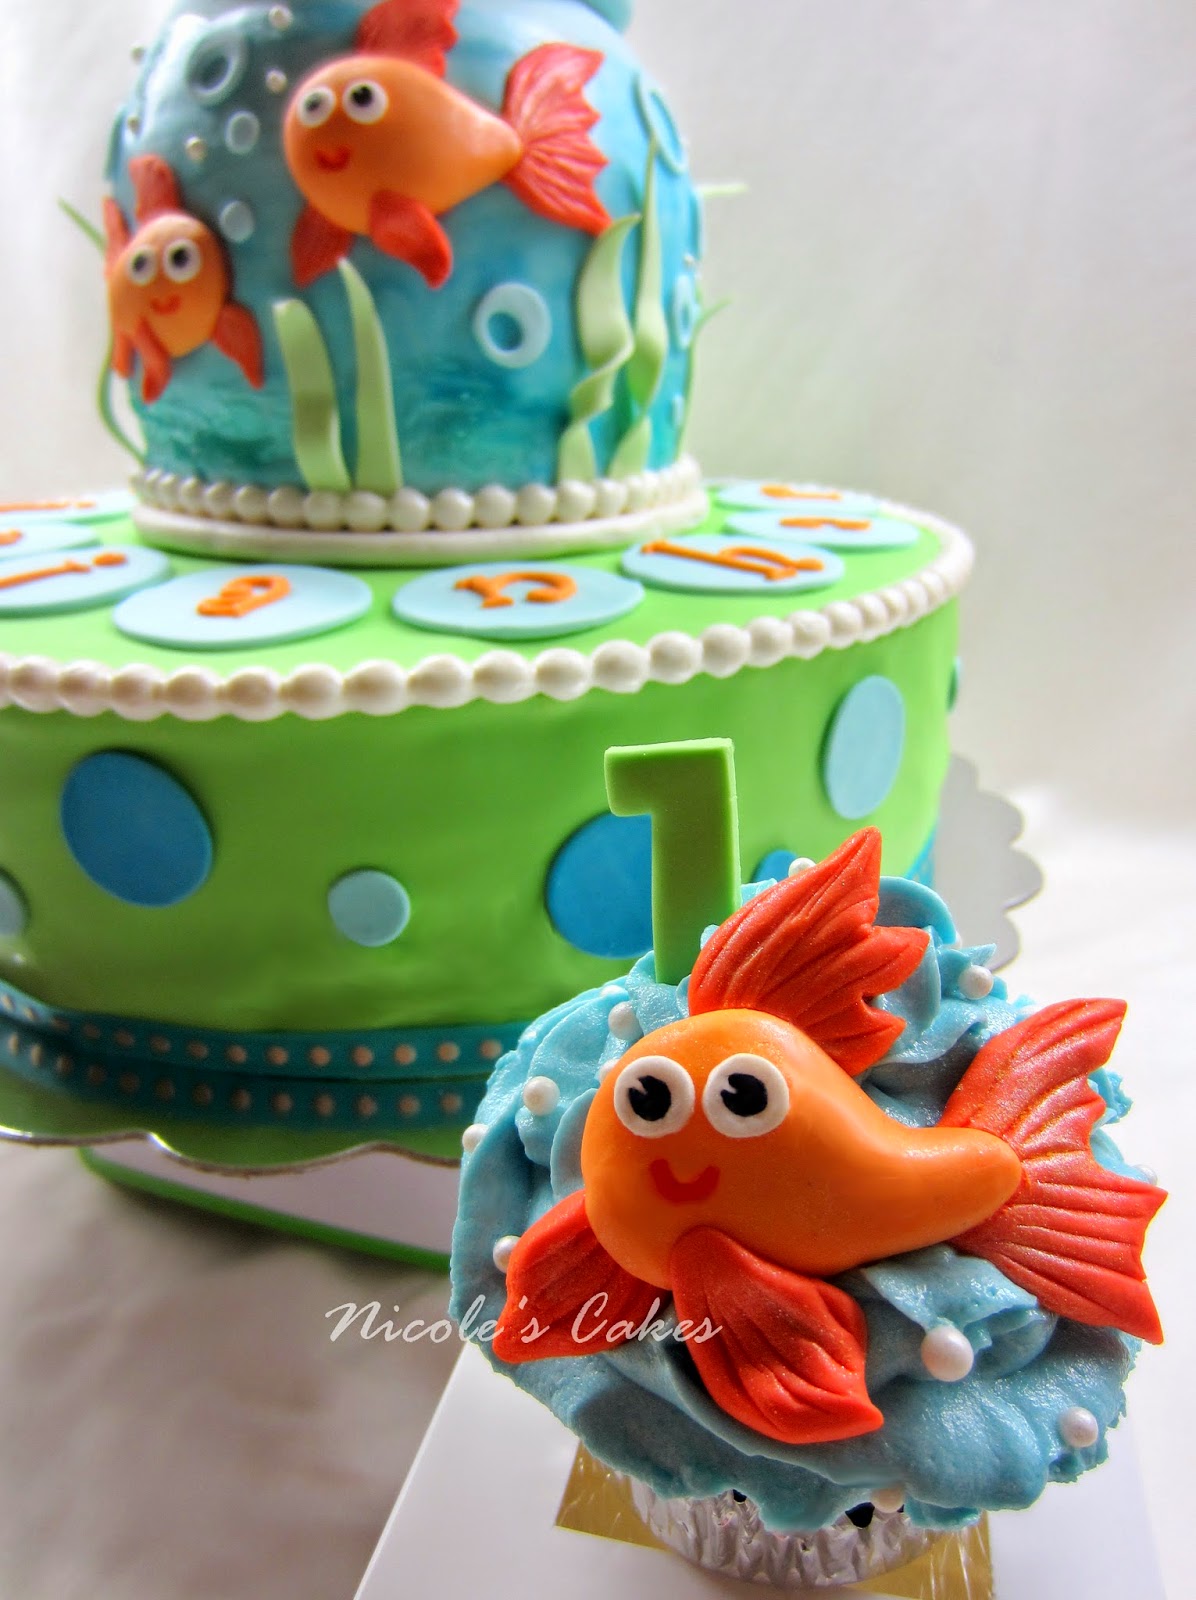 Confections Cakes  Creations  Goldfish in a Bowl  Adorable 1st  